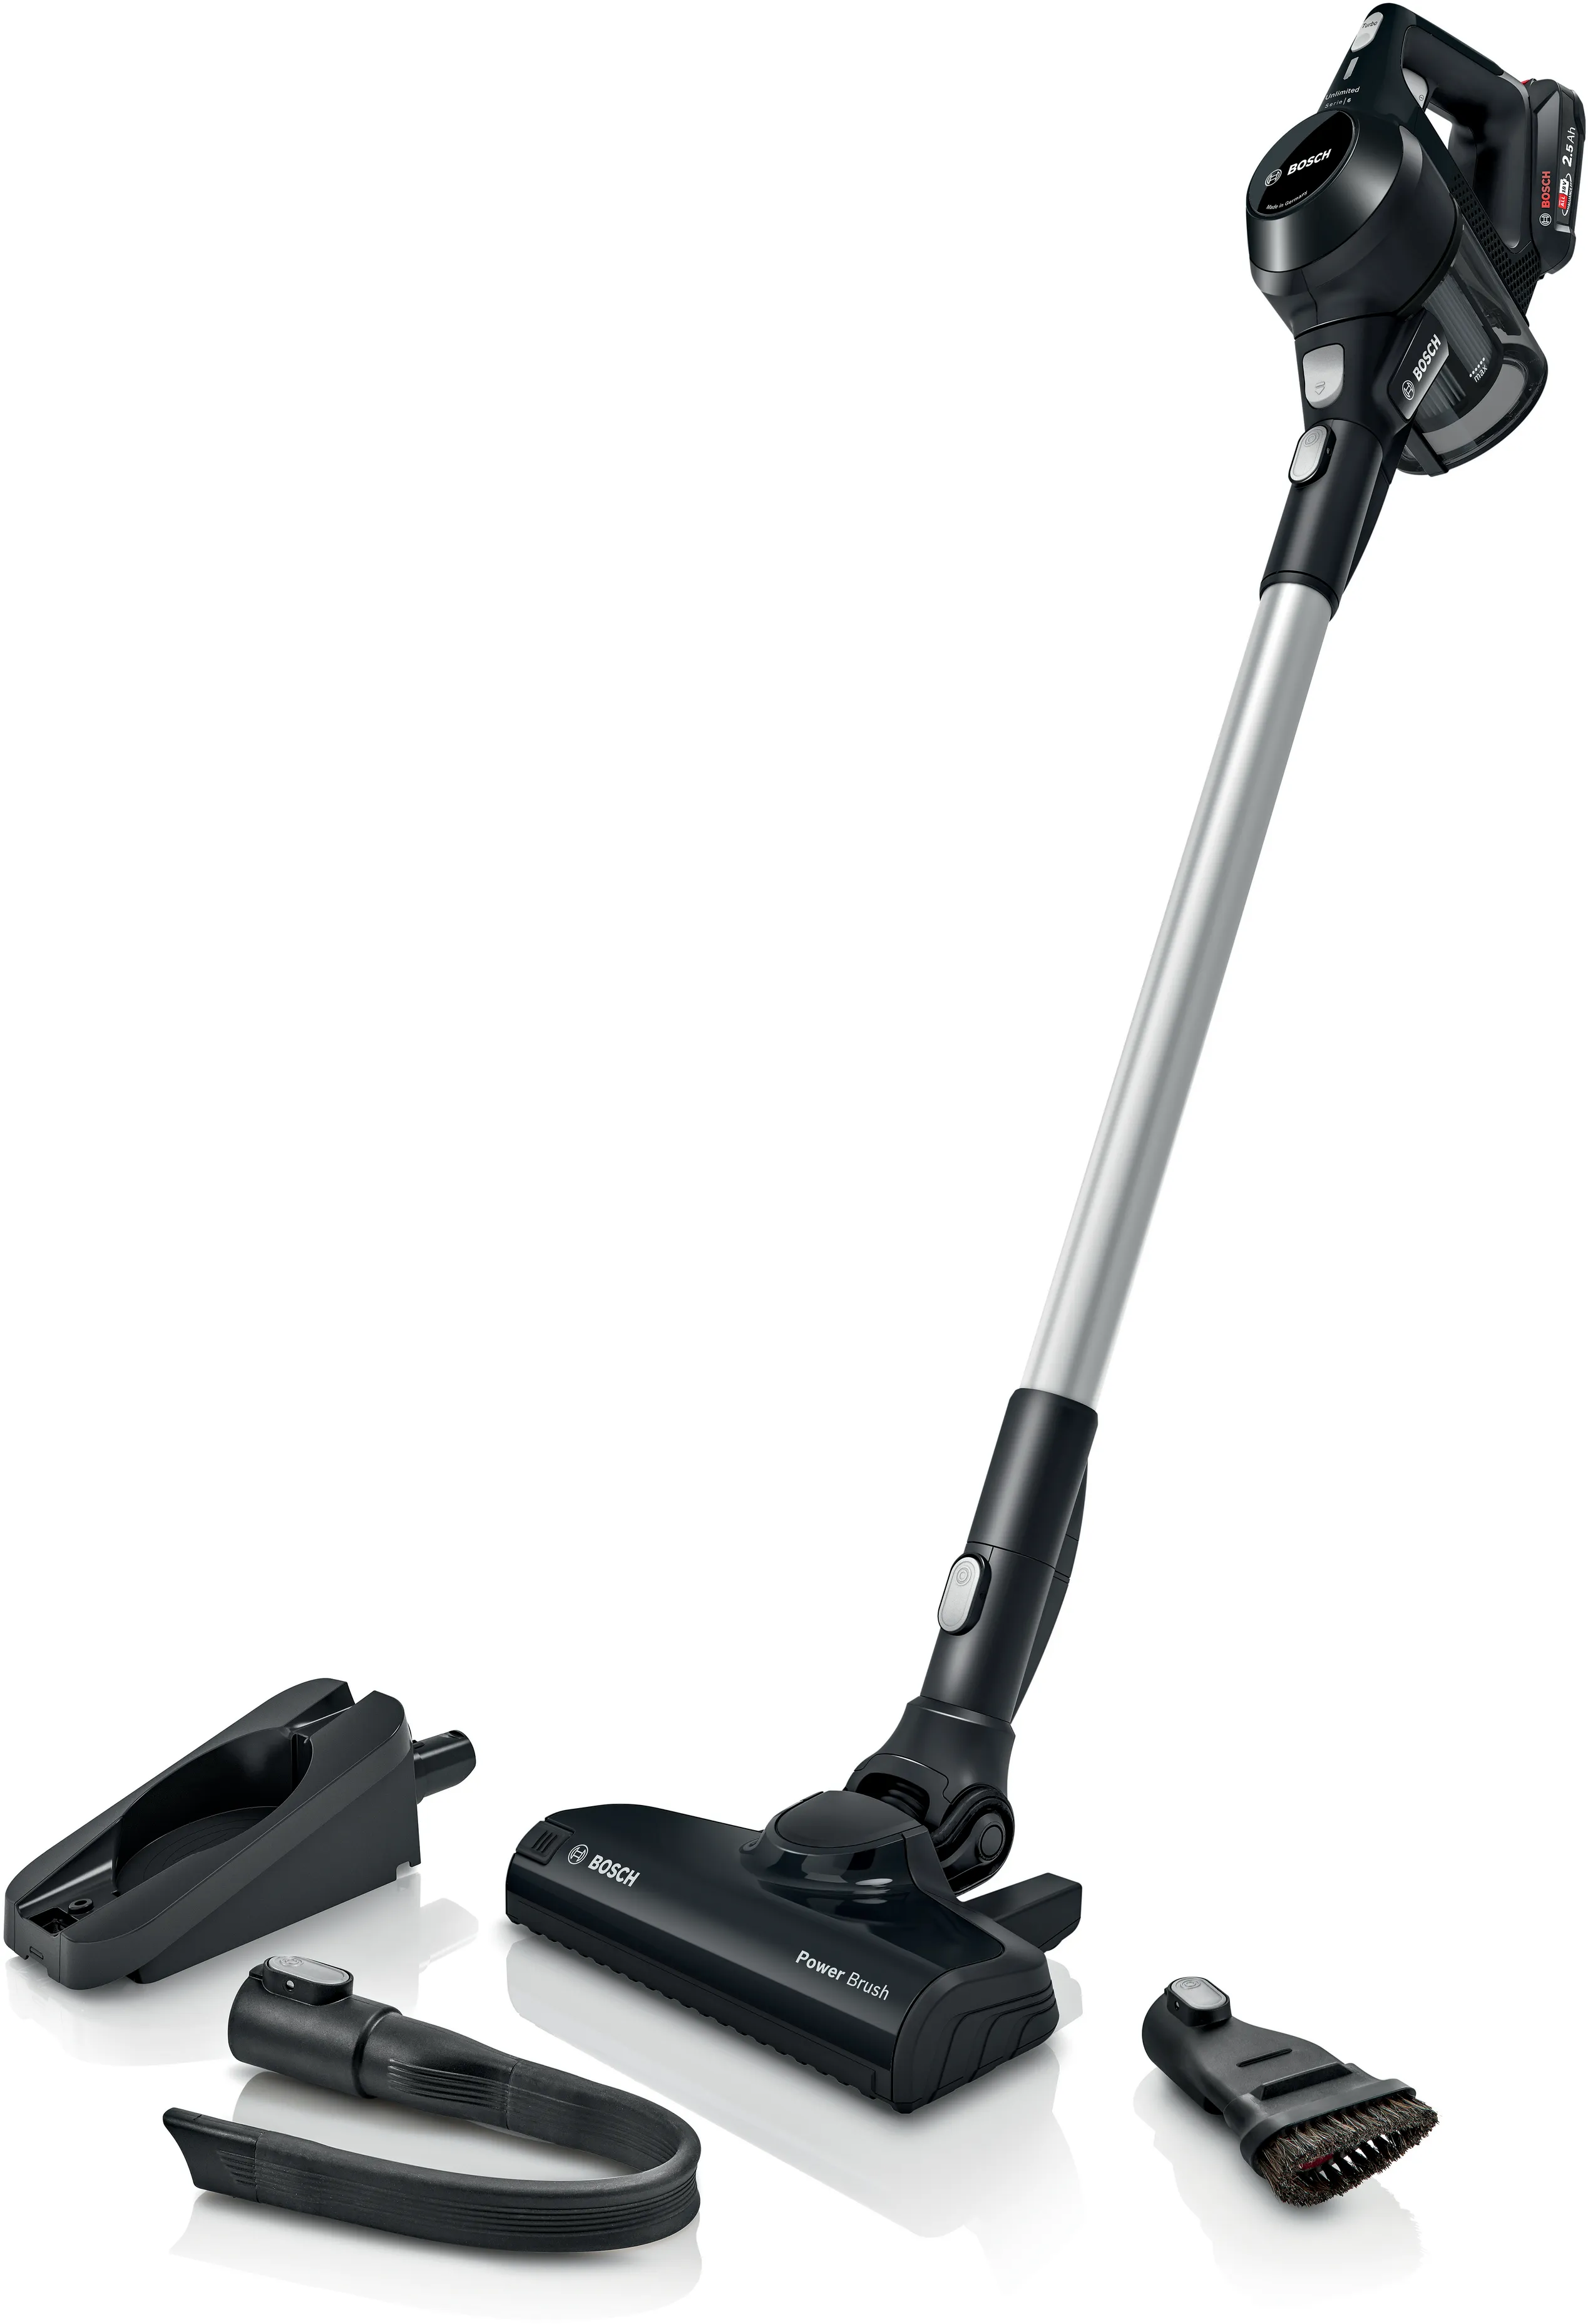 Series 6 Rechargeable vacuum cleaner Unlimited Black 